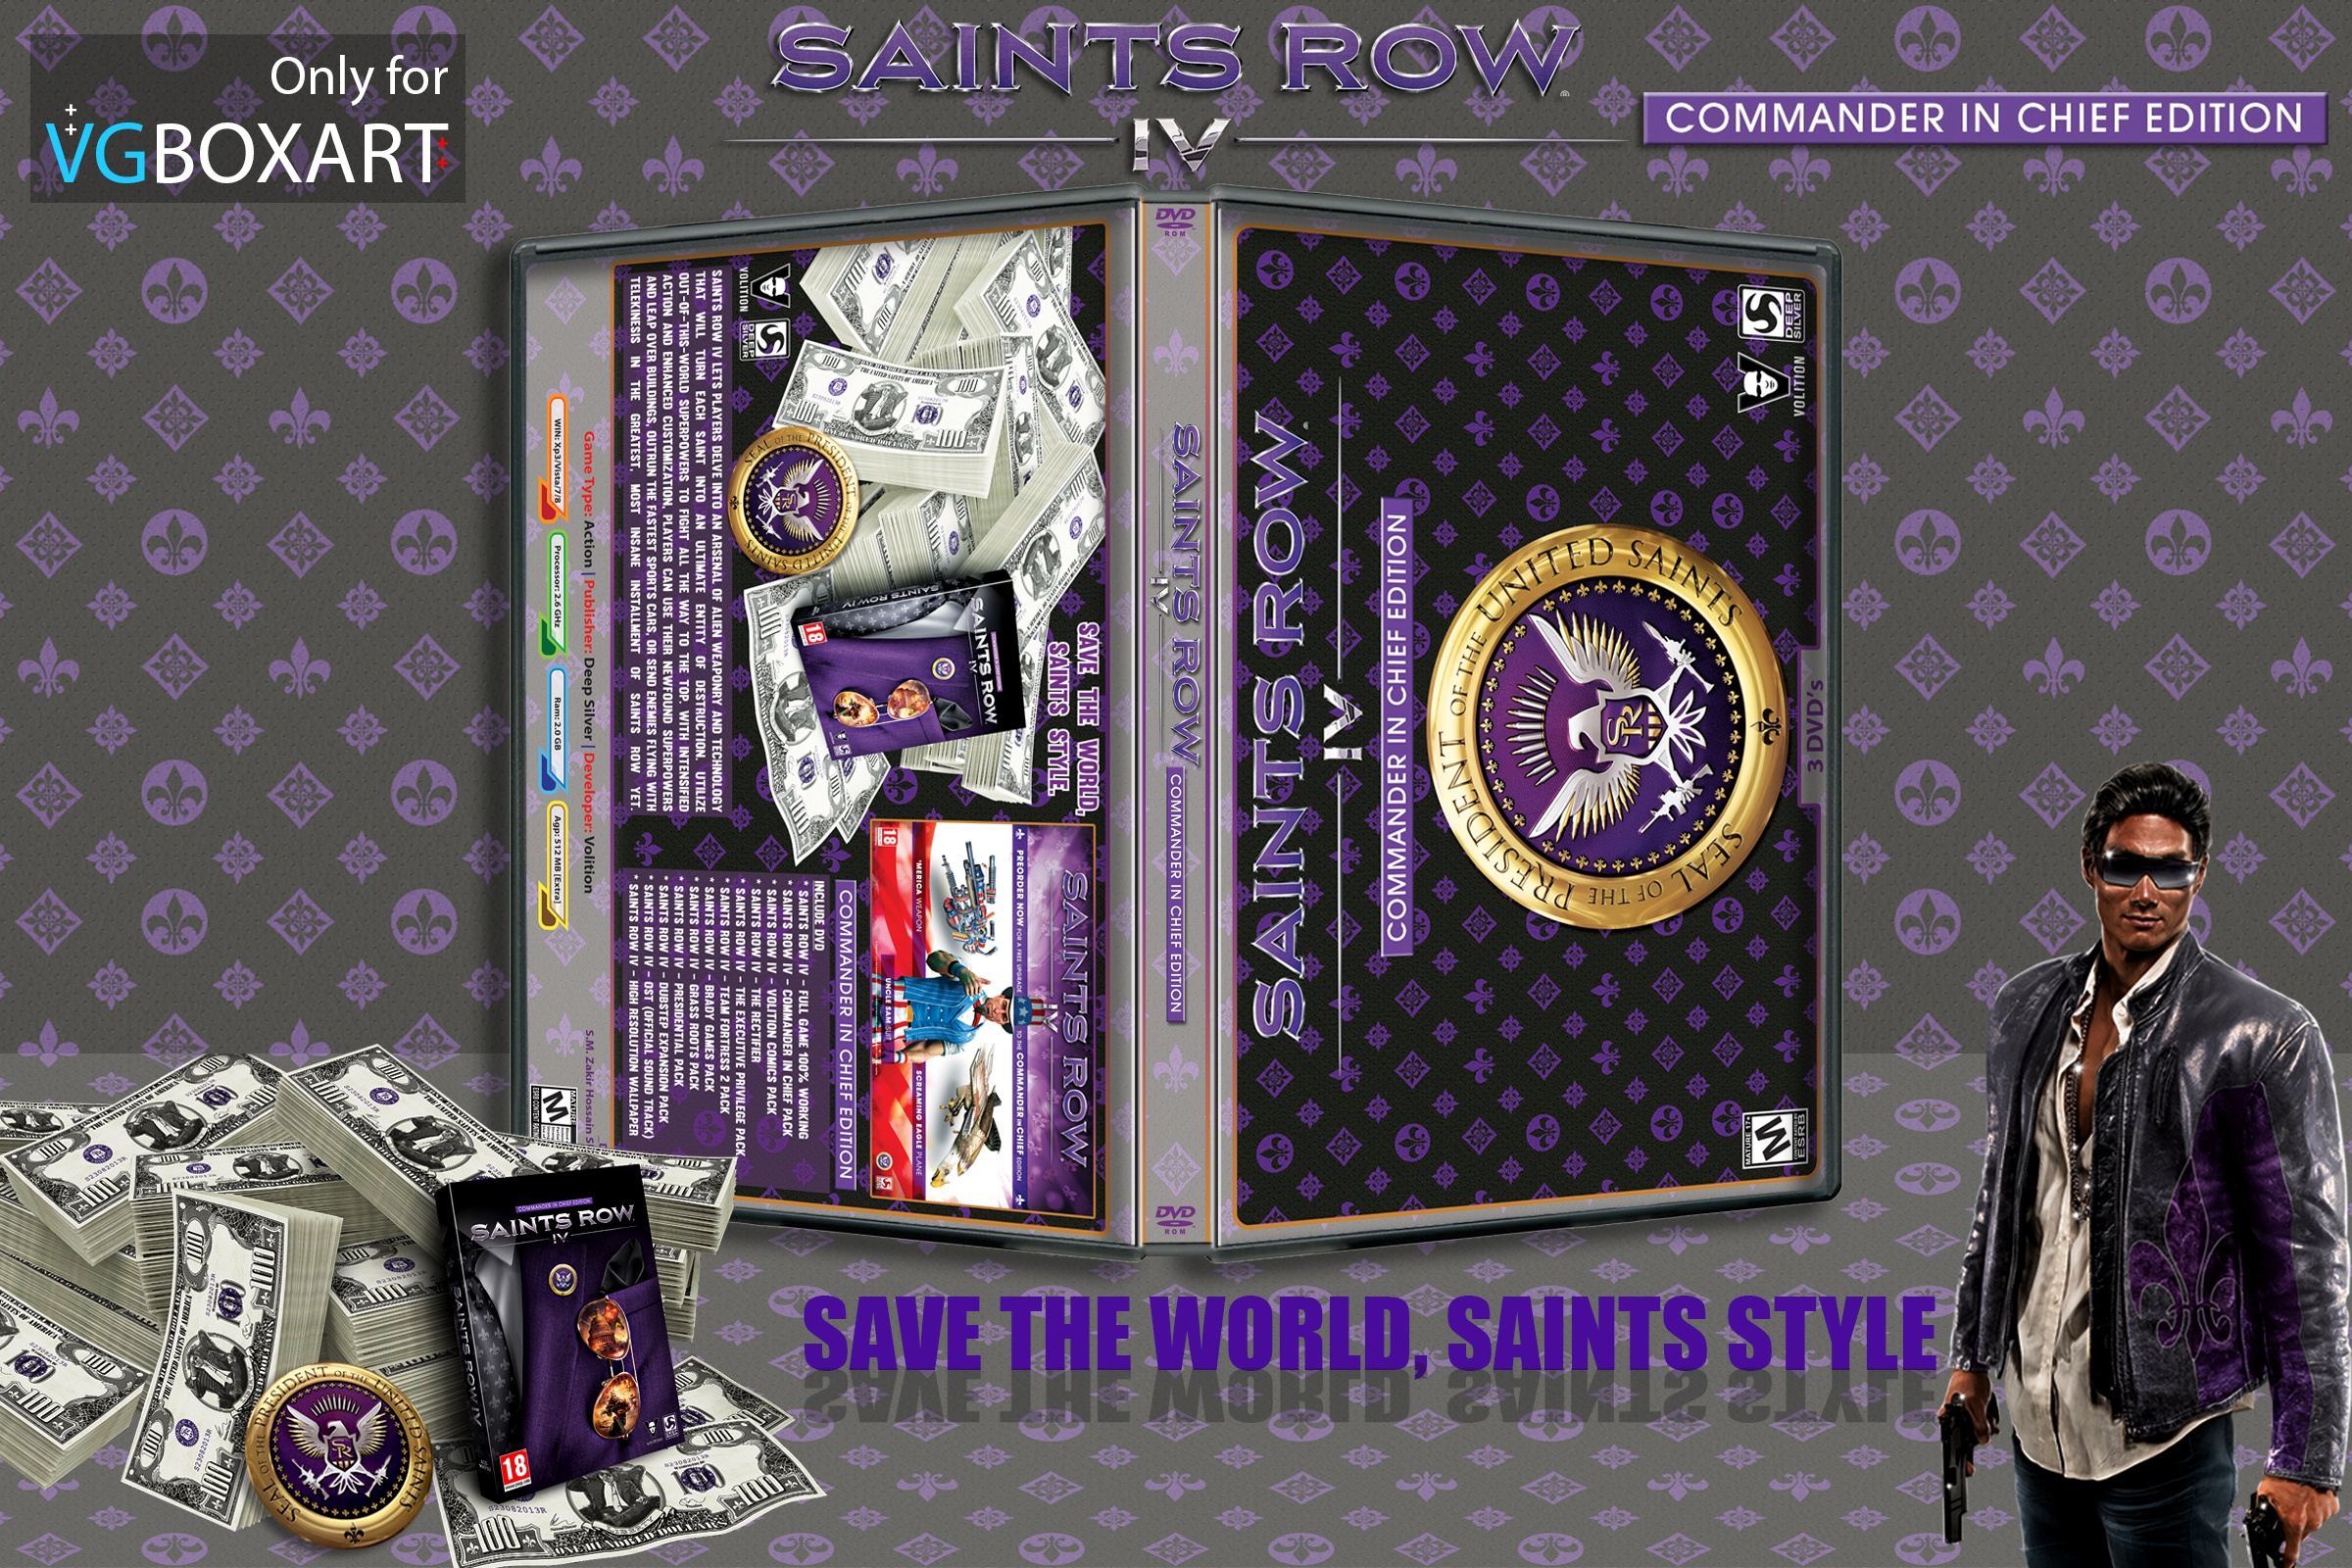 Saints Row IV Commander IN Chief Edition box cover